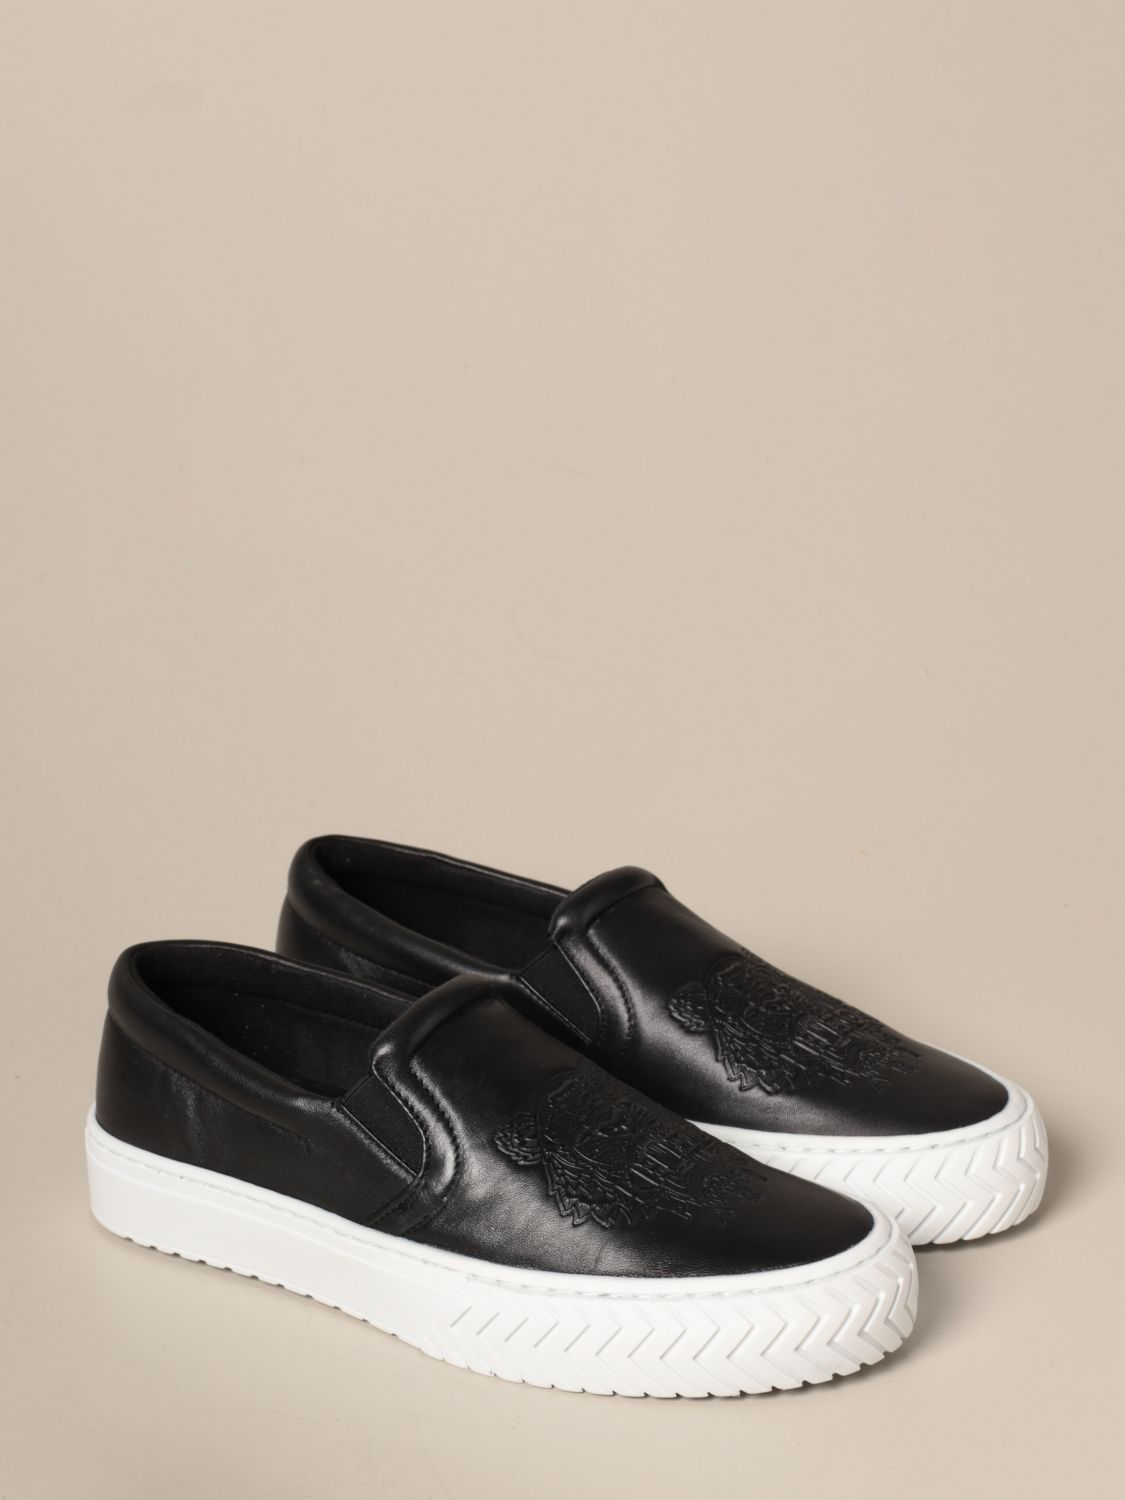 kenzo leather shoes